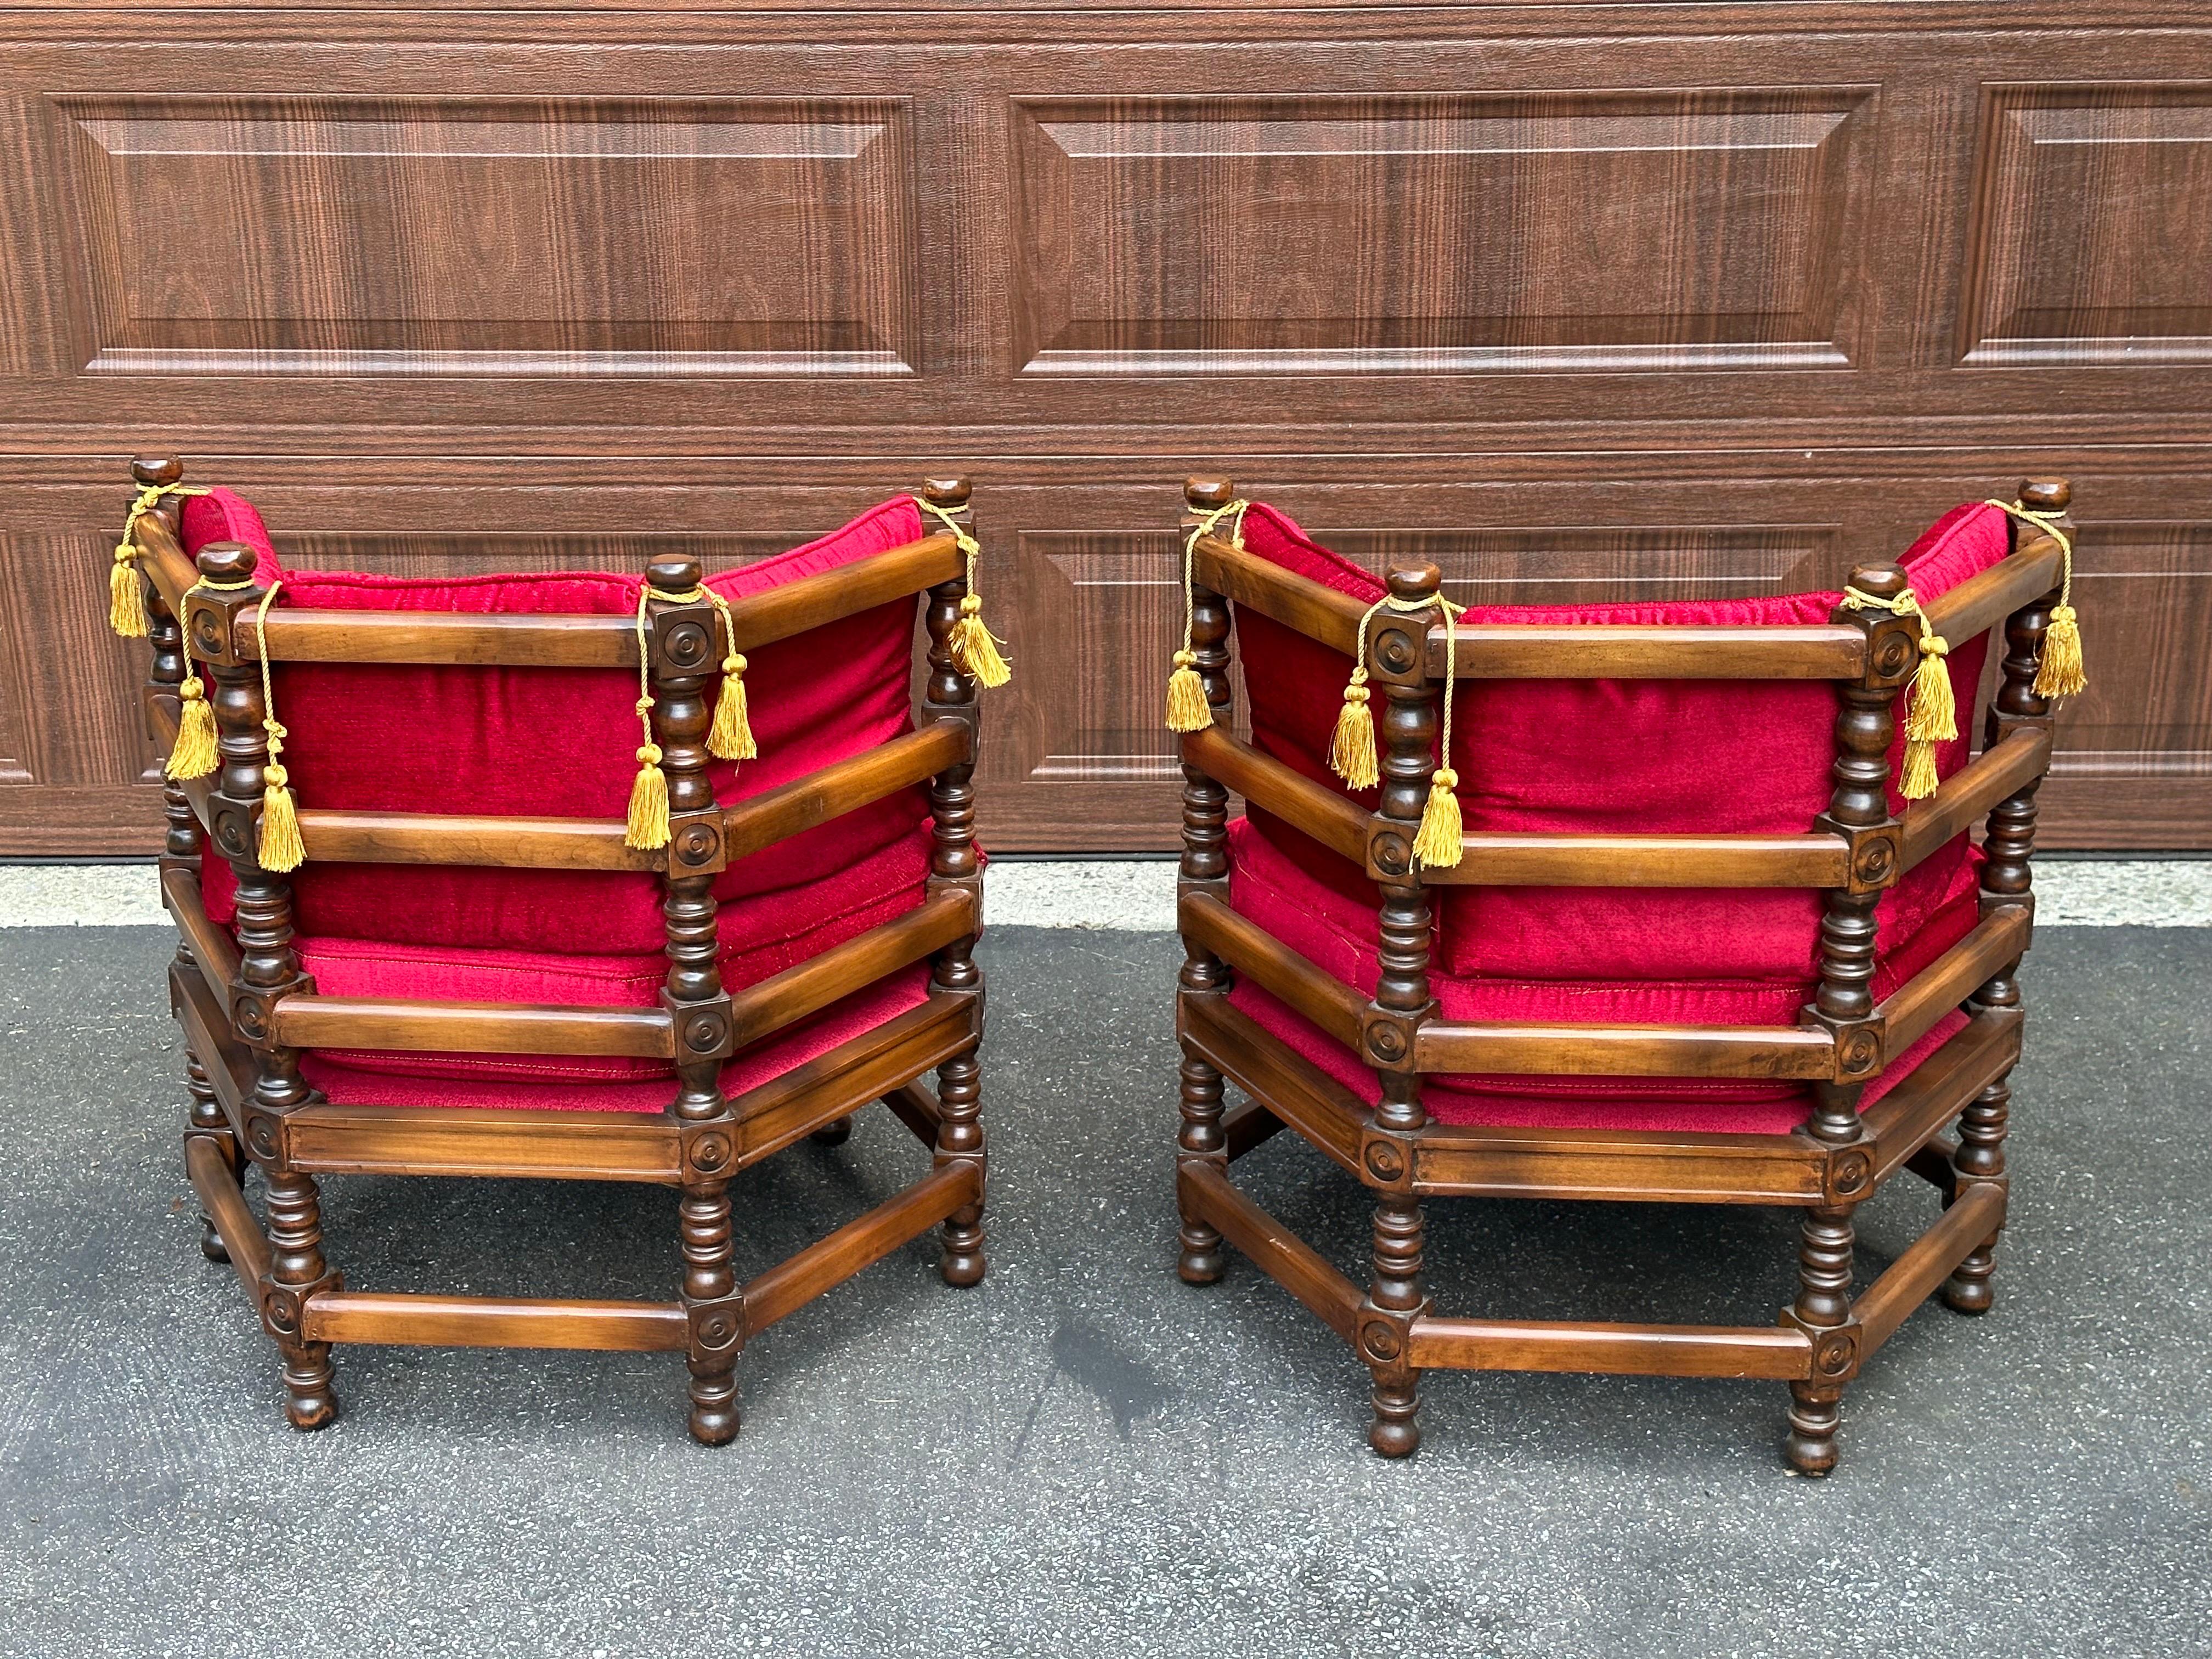 20th Century Mediterranean Spanish Revival Boho Chic Hexagonal Chairs - Showpieces by Lewitte For Sale